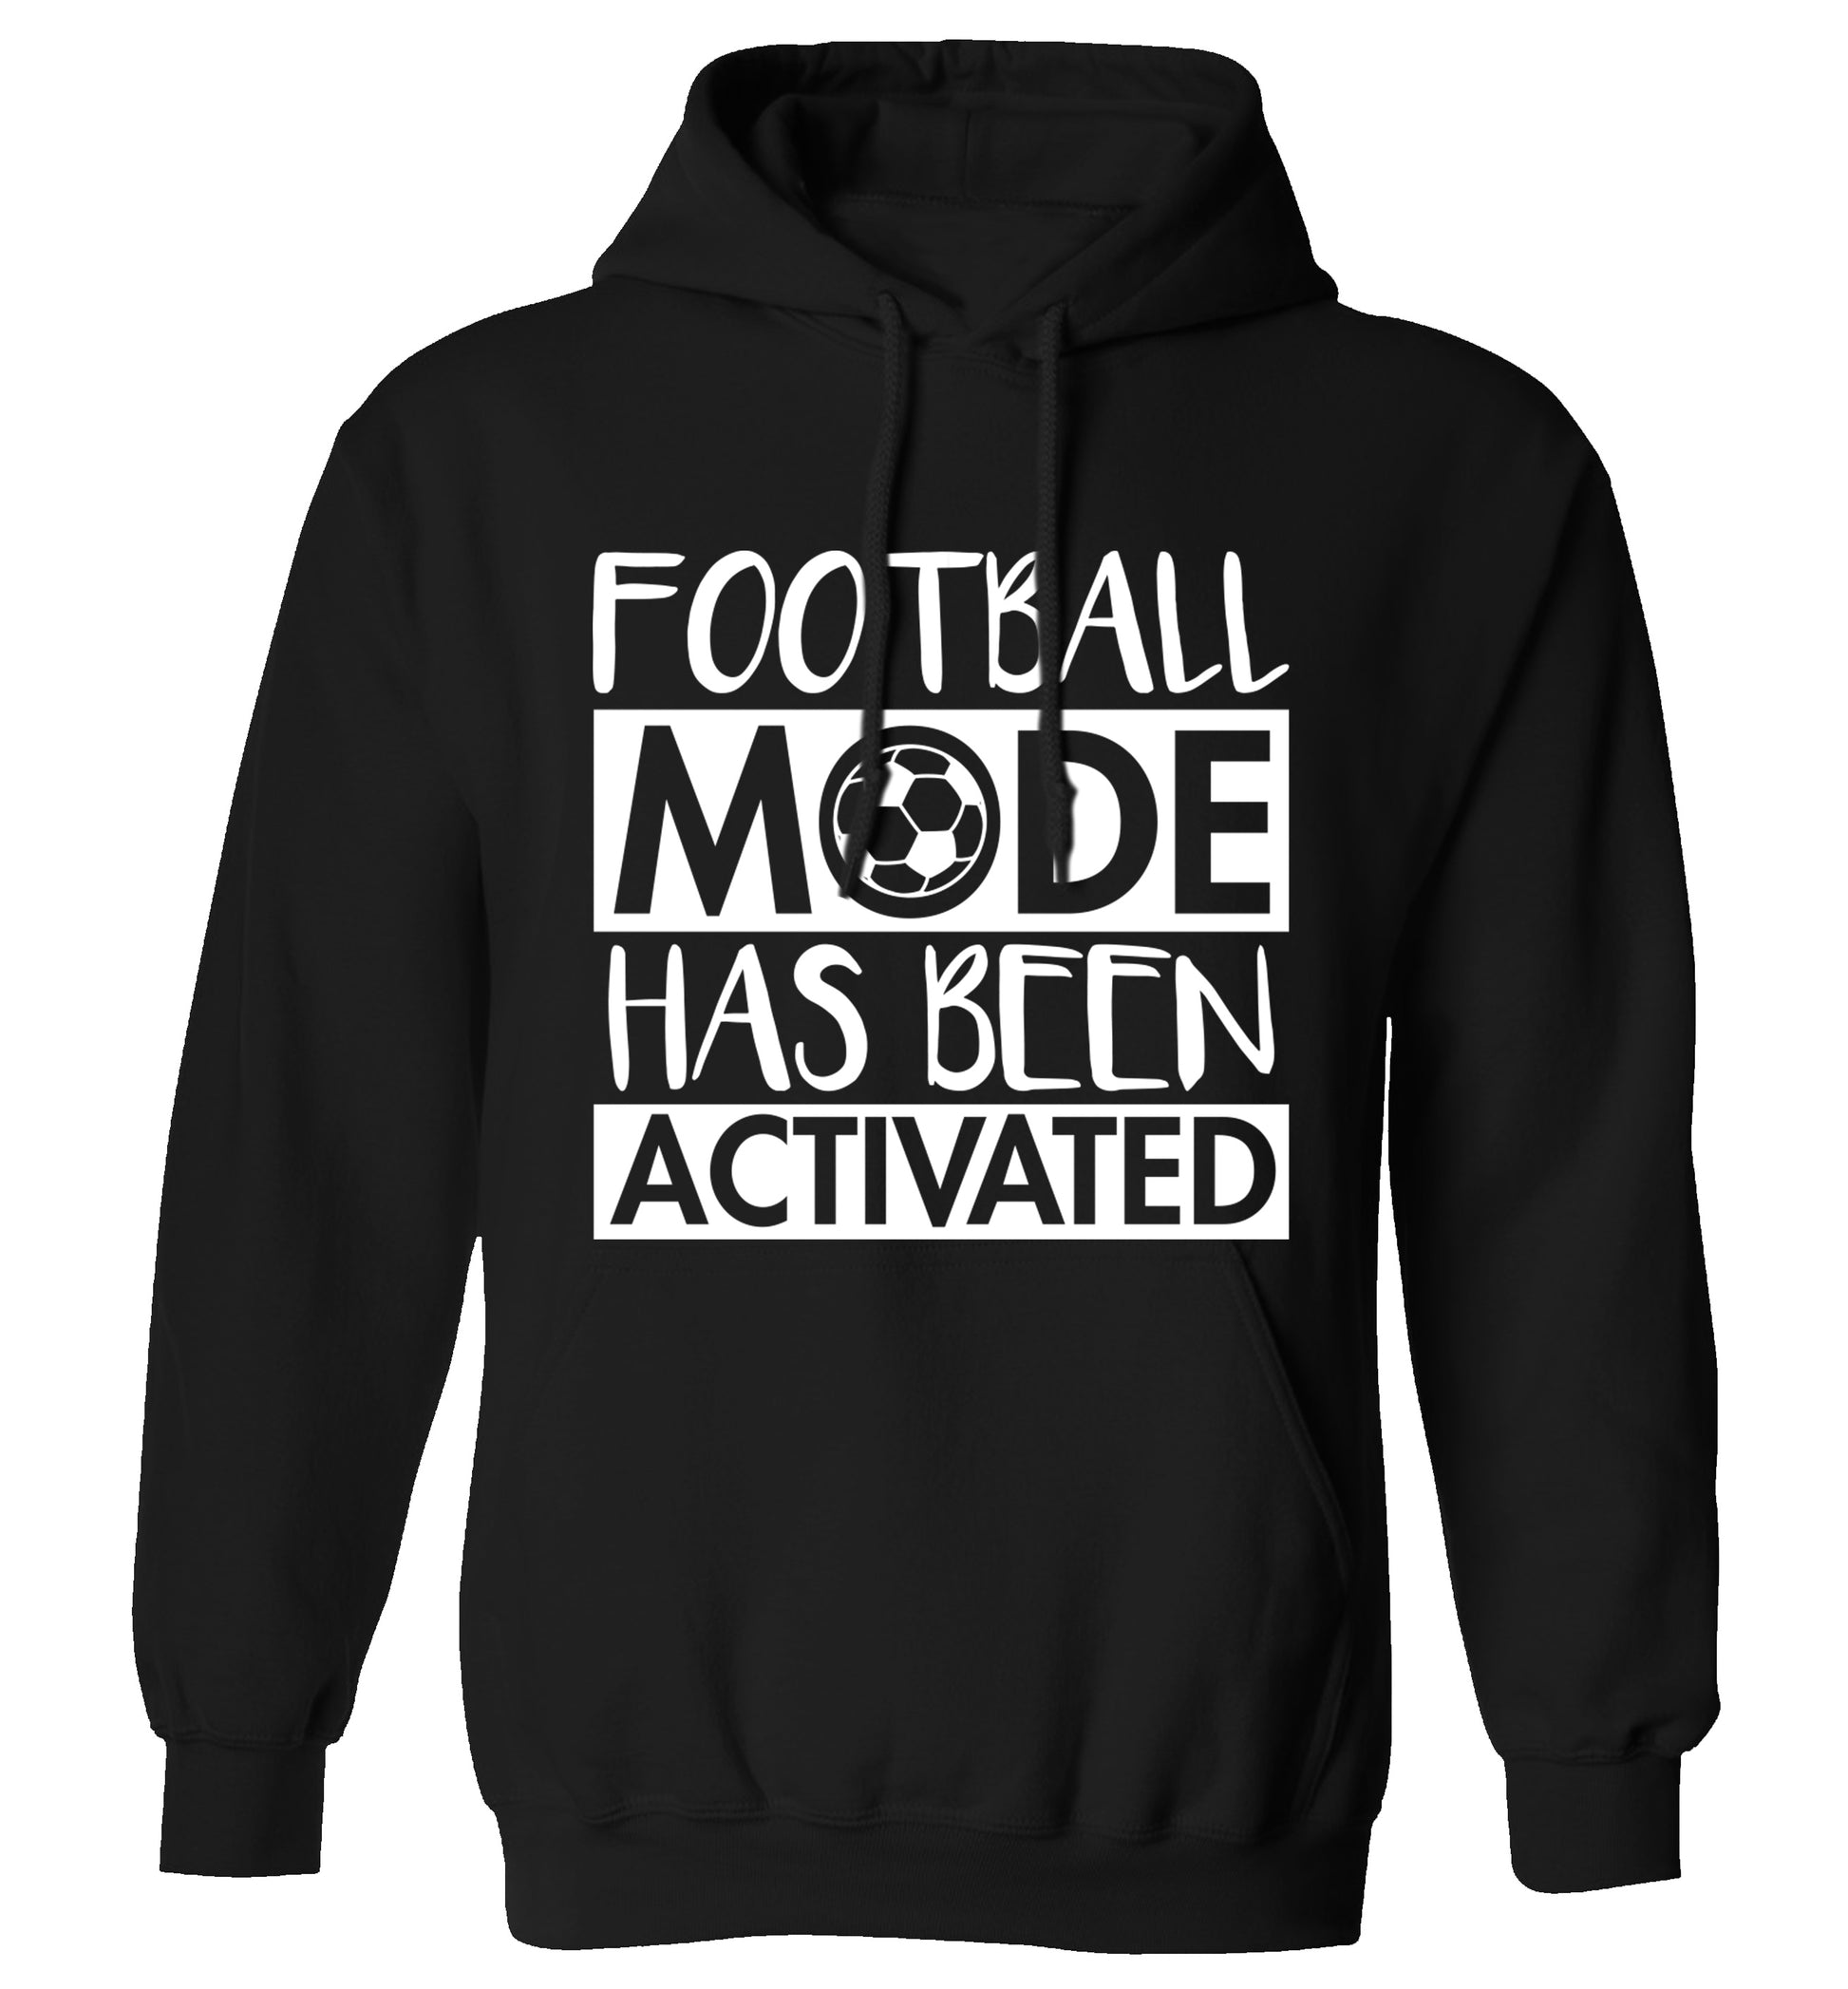 Football mode has been activated adults unisexblack hoodie 2XL